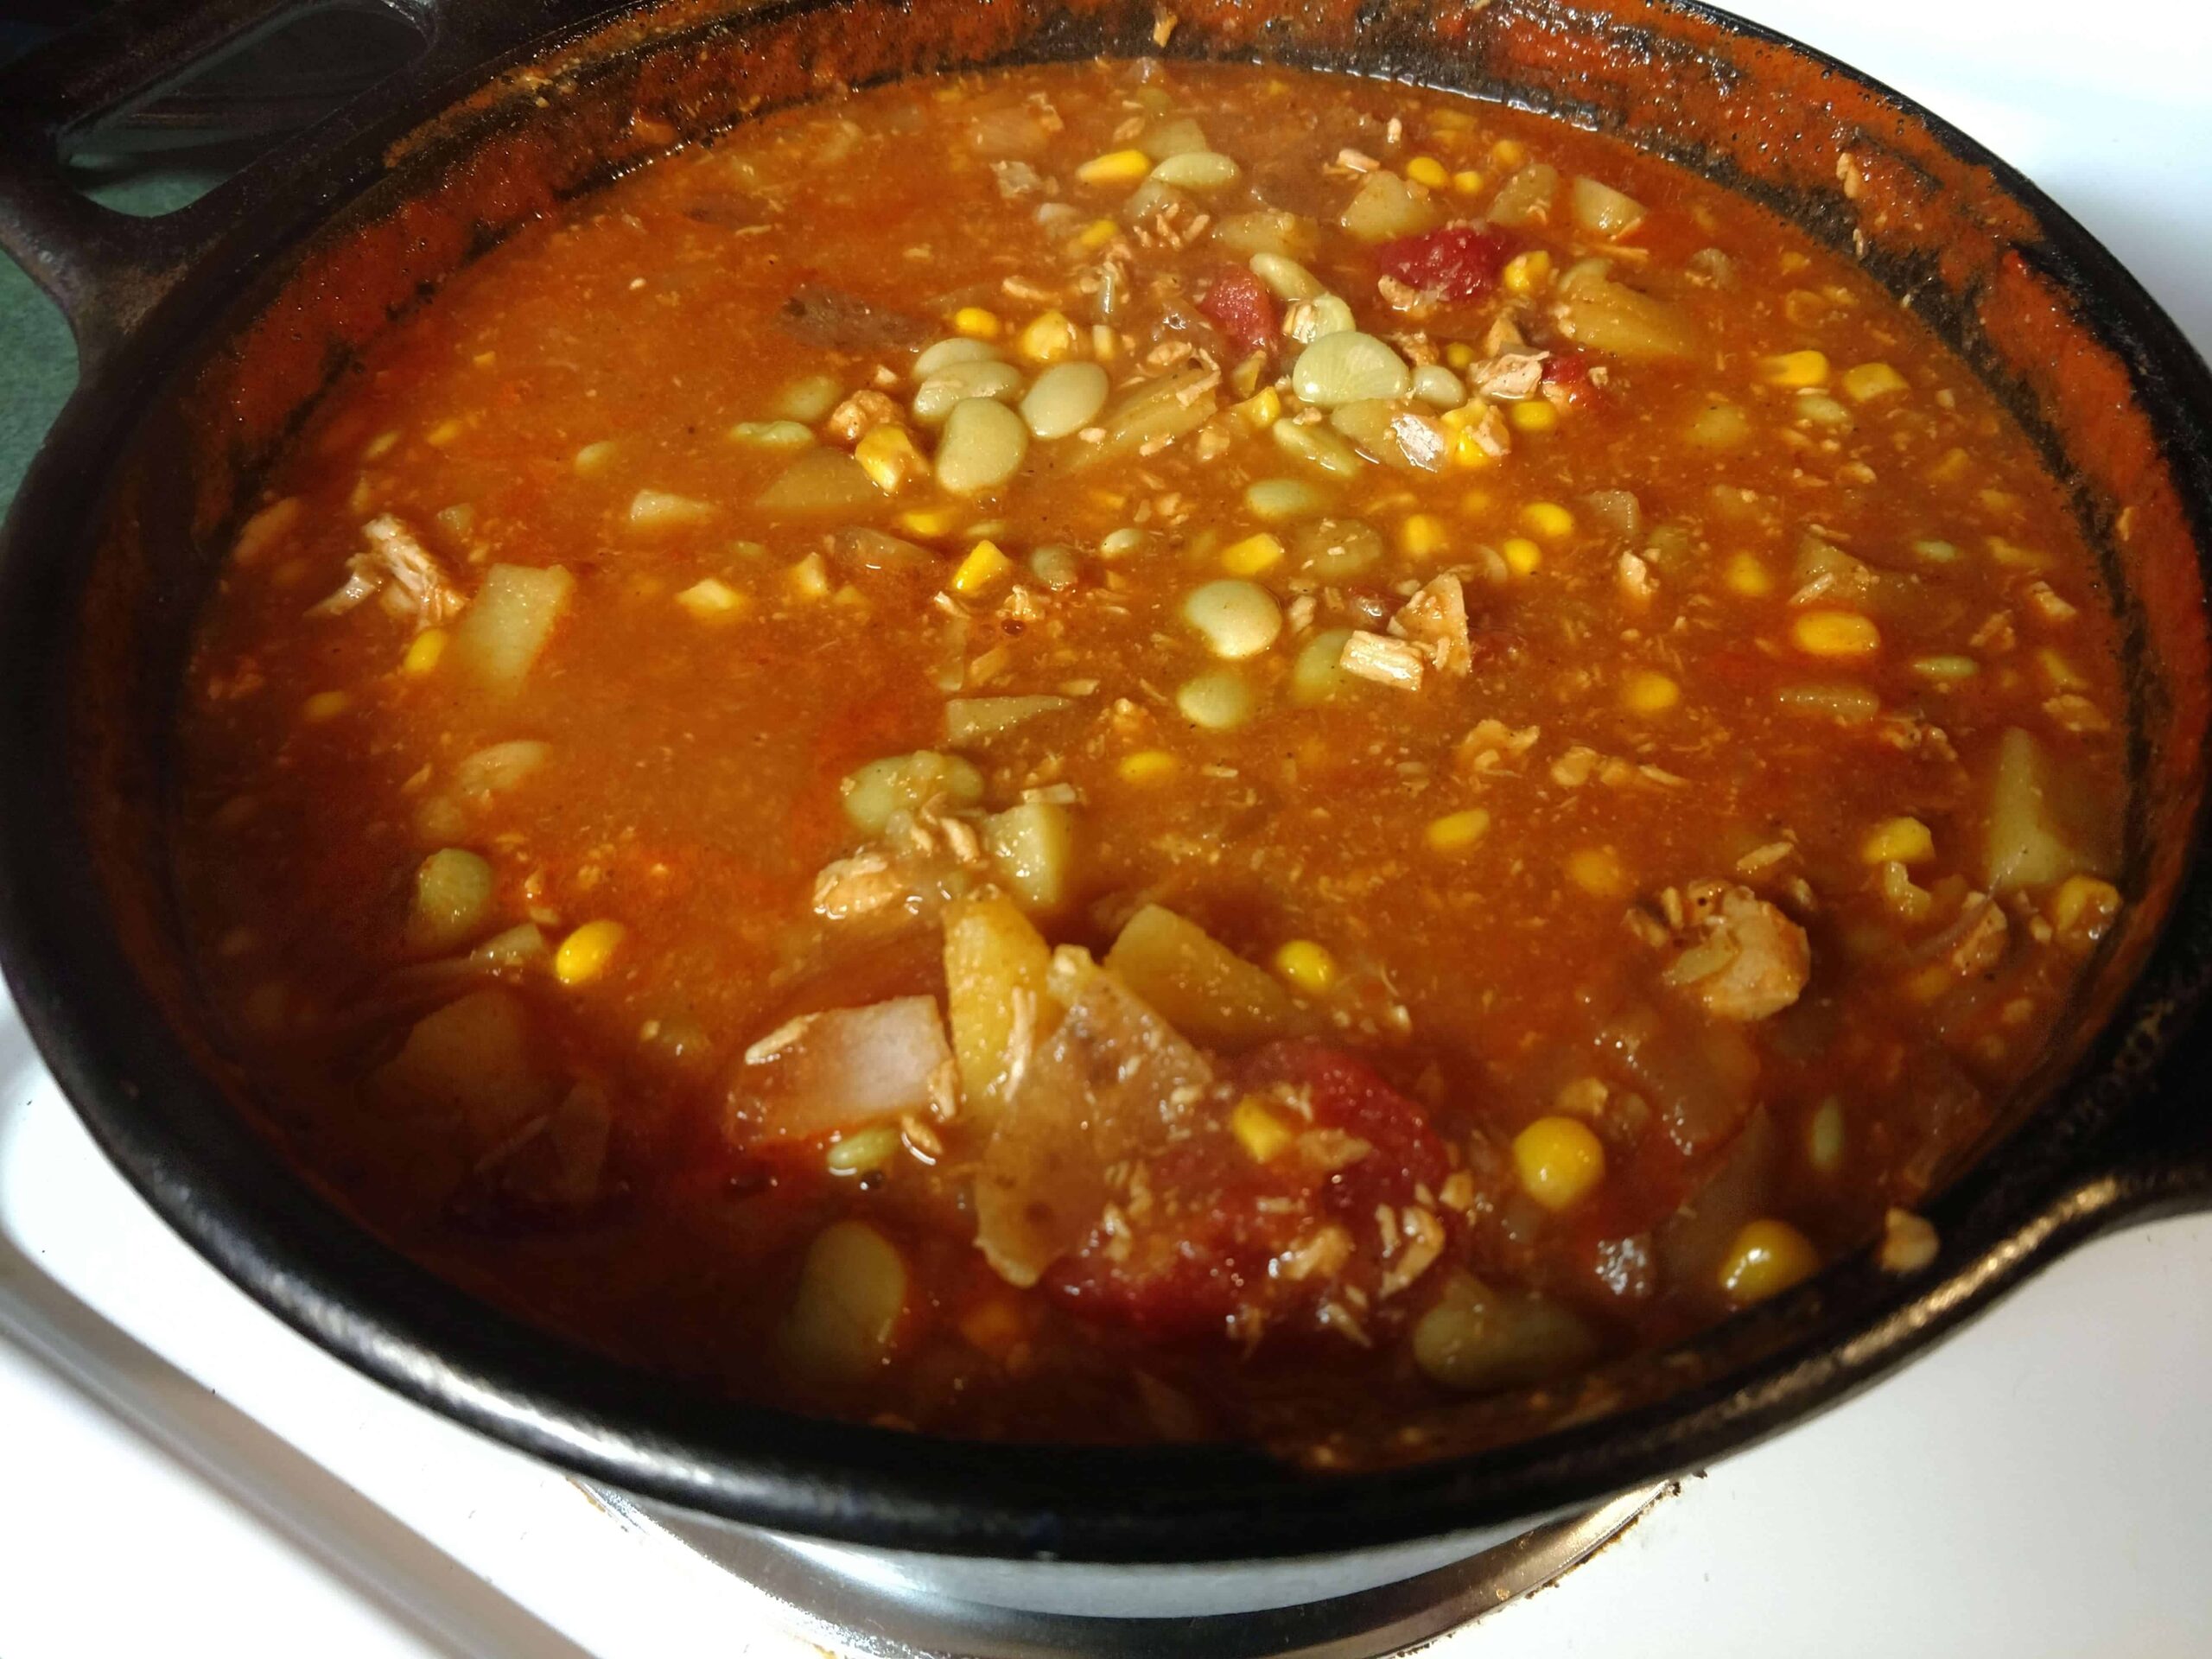 This image shows a pot of Brunswick Stew in a cast iron Dutch oven.